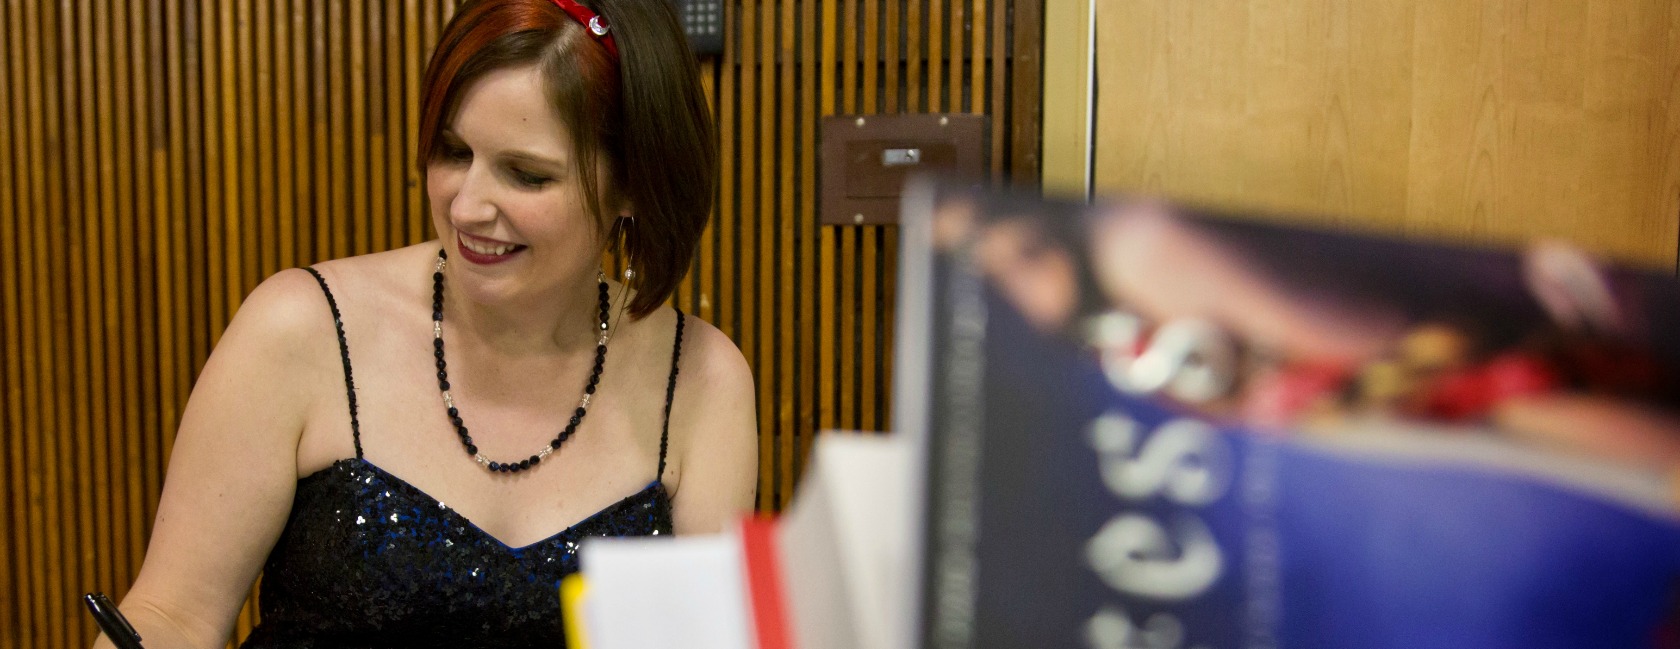 Marissa Meyer signs a book at the launch party of "Cress" at PLU on Feb. 4, 2014. (Photo: John Froschauer/PLU)